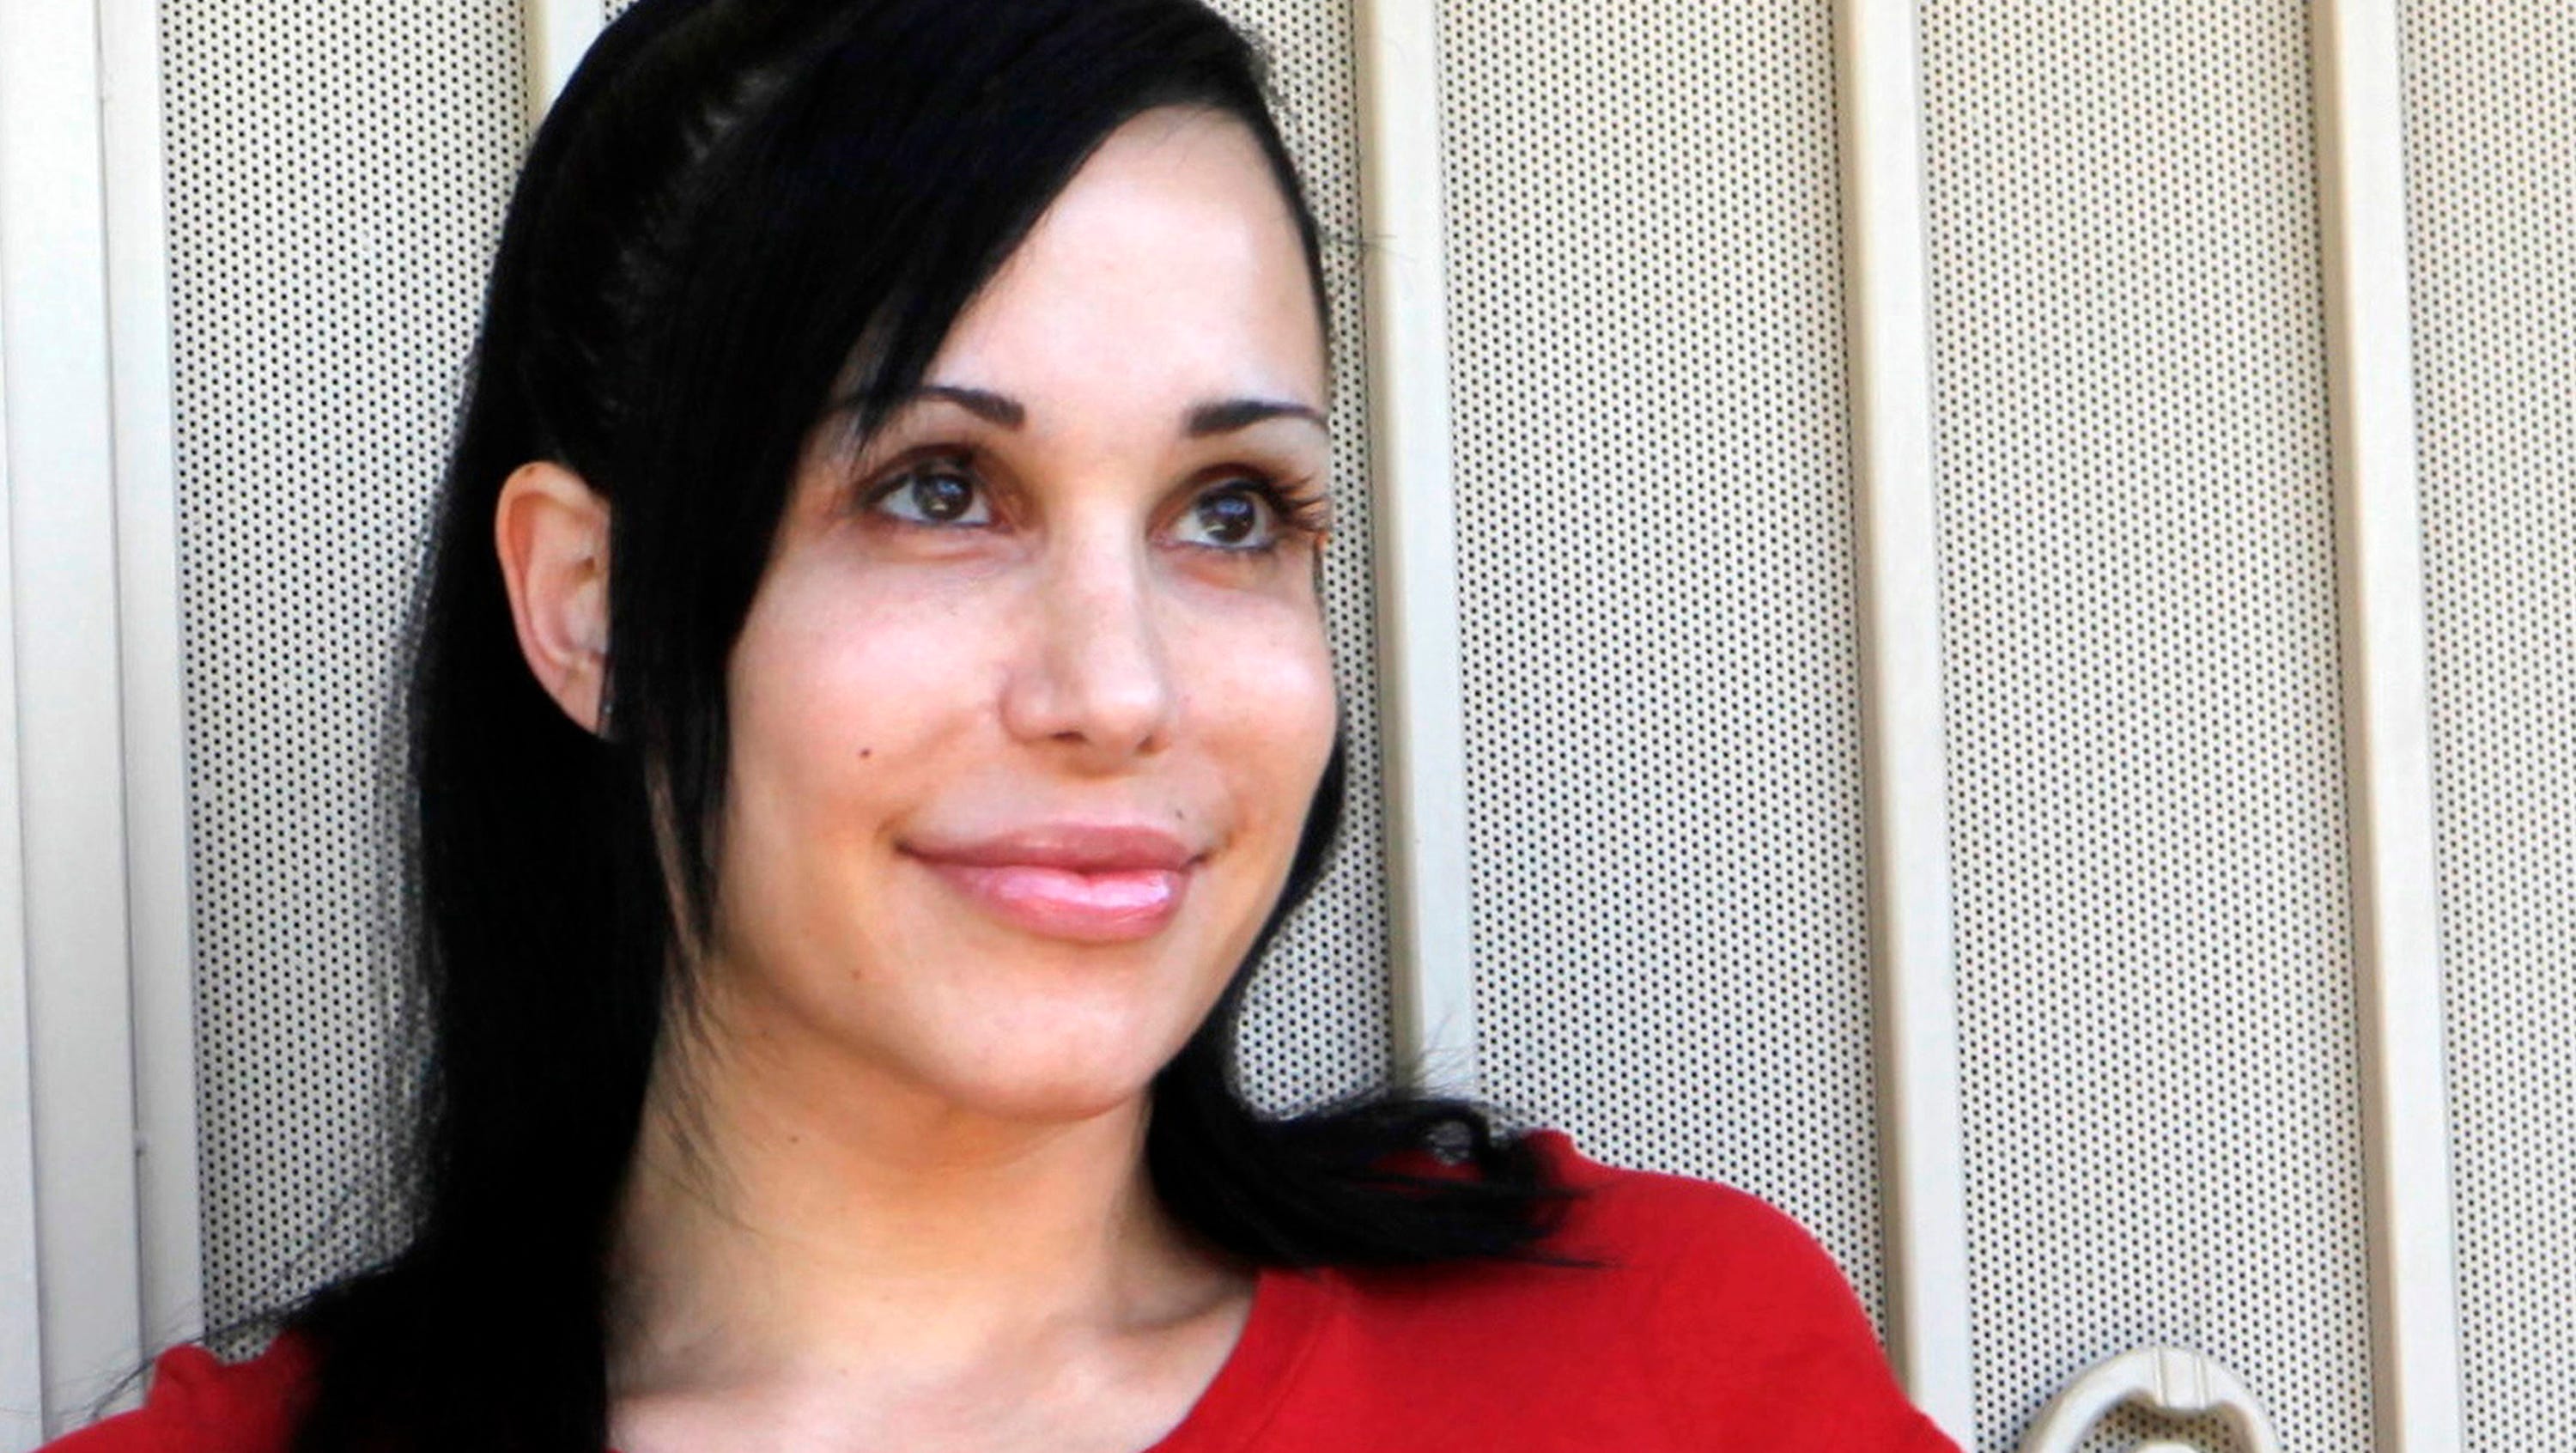 8 Facts About Octomom Nadya Suleman